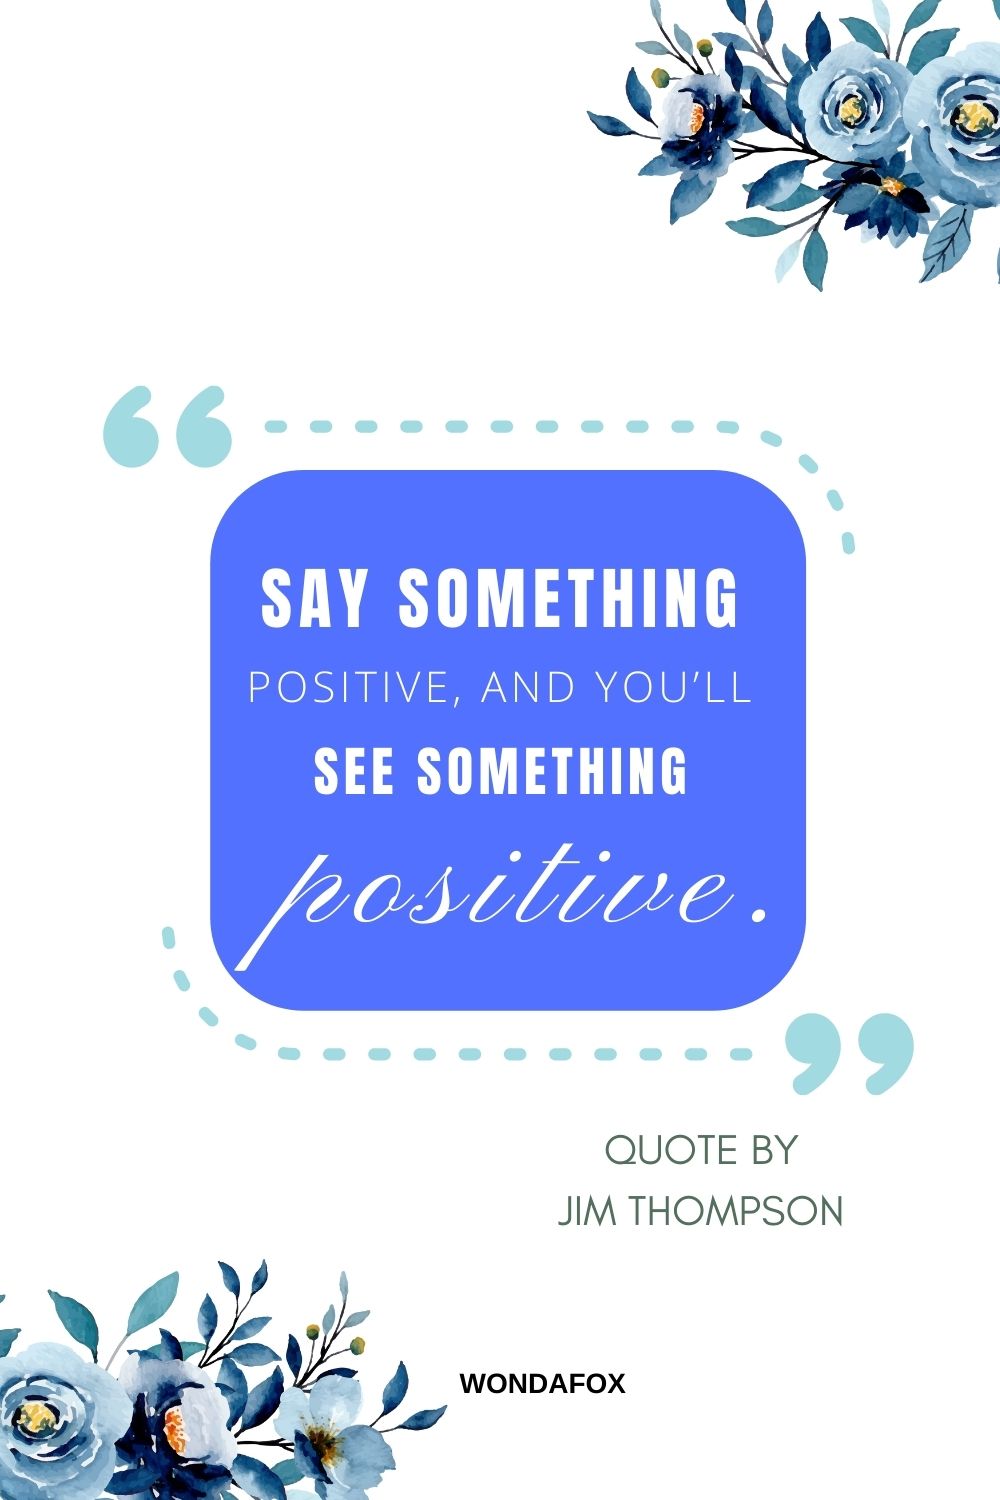 Short Positive Quotes   "Say something positive, and you’ll see something positive.”
Jim Thompson